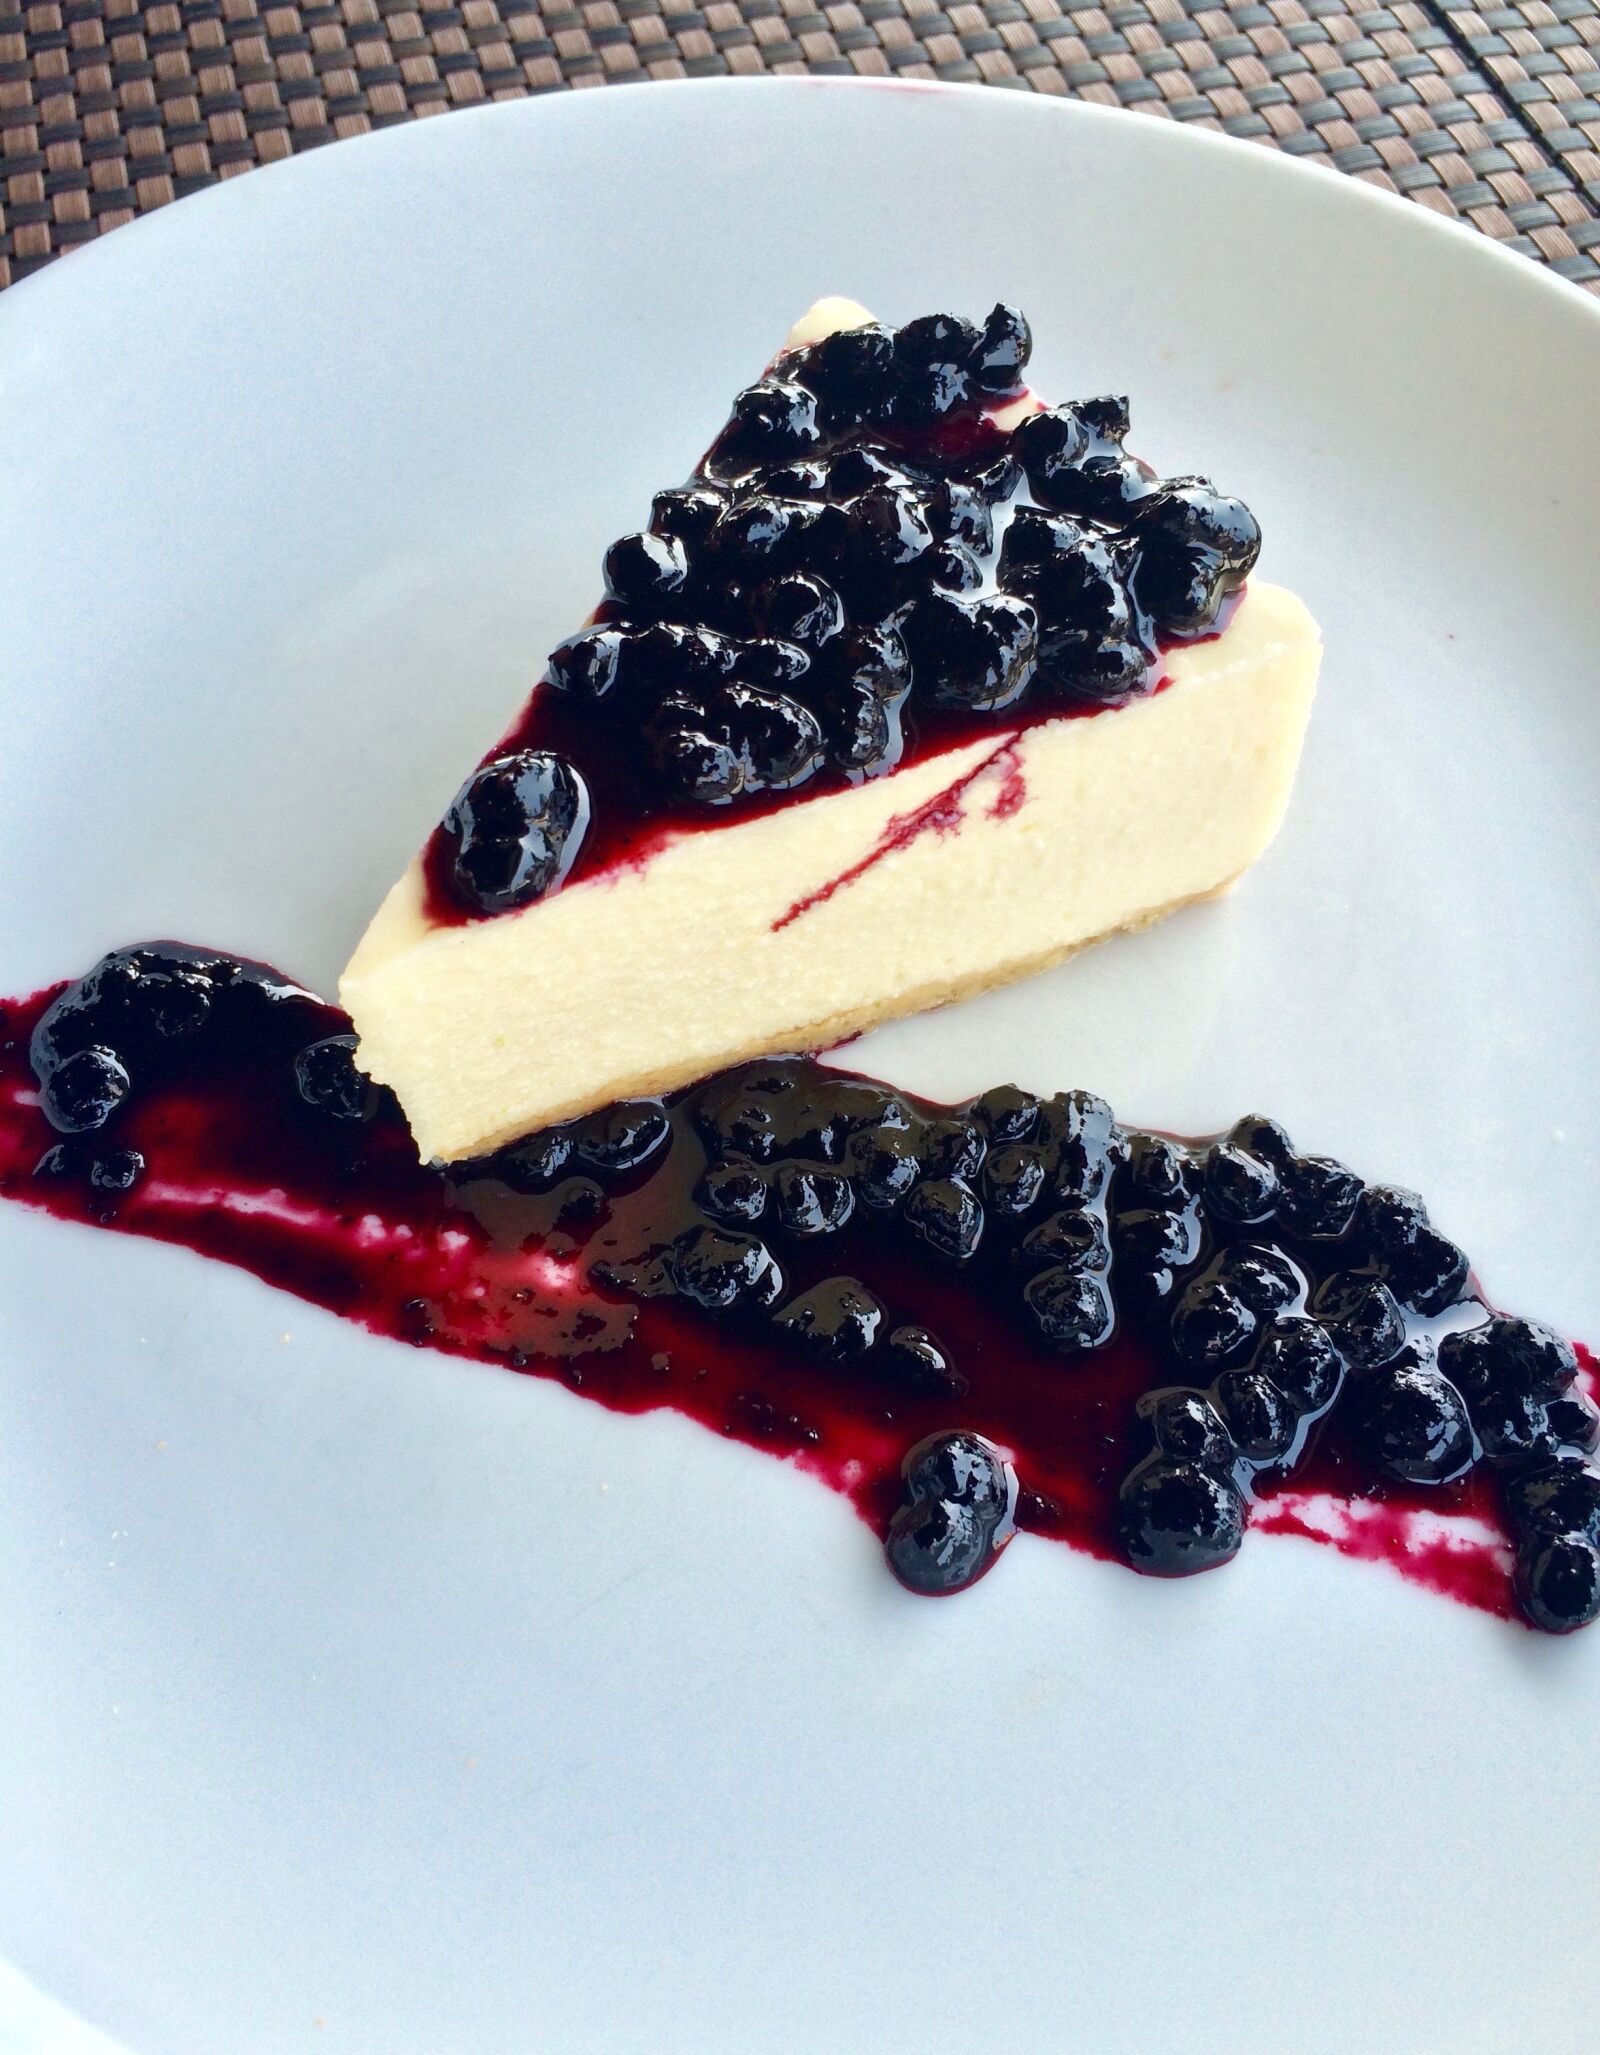 Apple iPhone 5s sample photo. Blue berry cheese cake photography